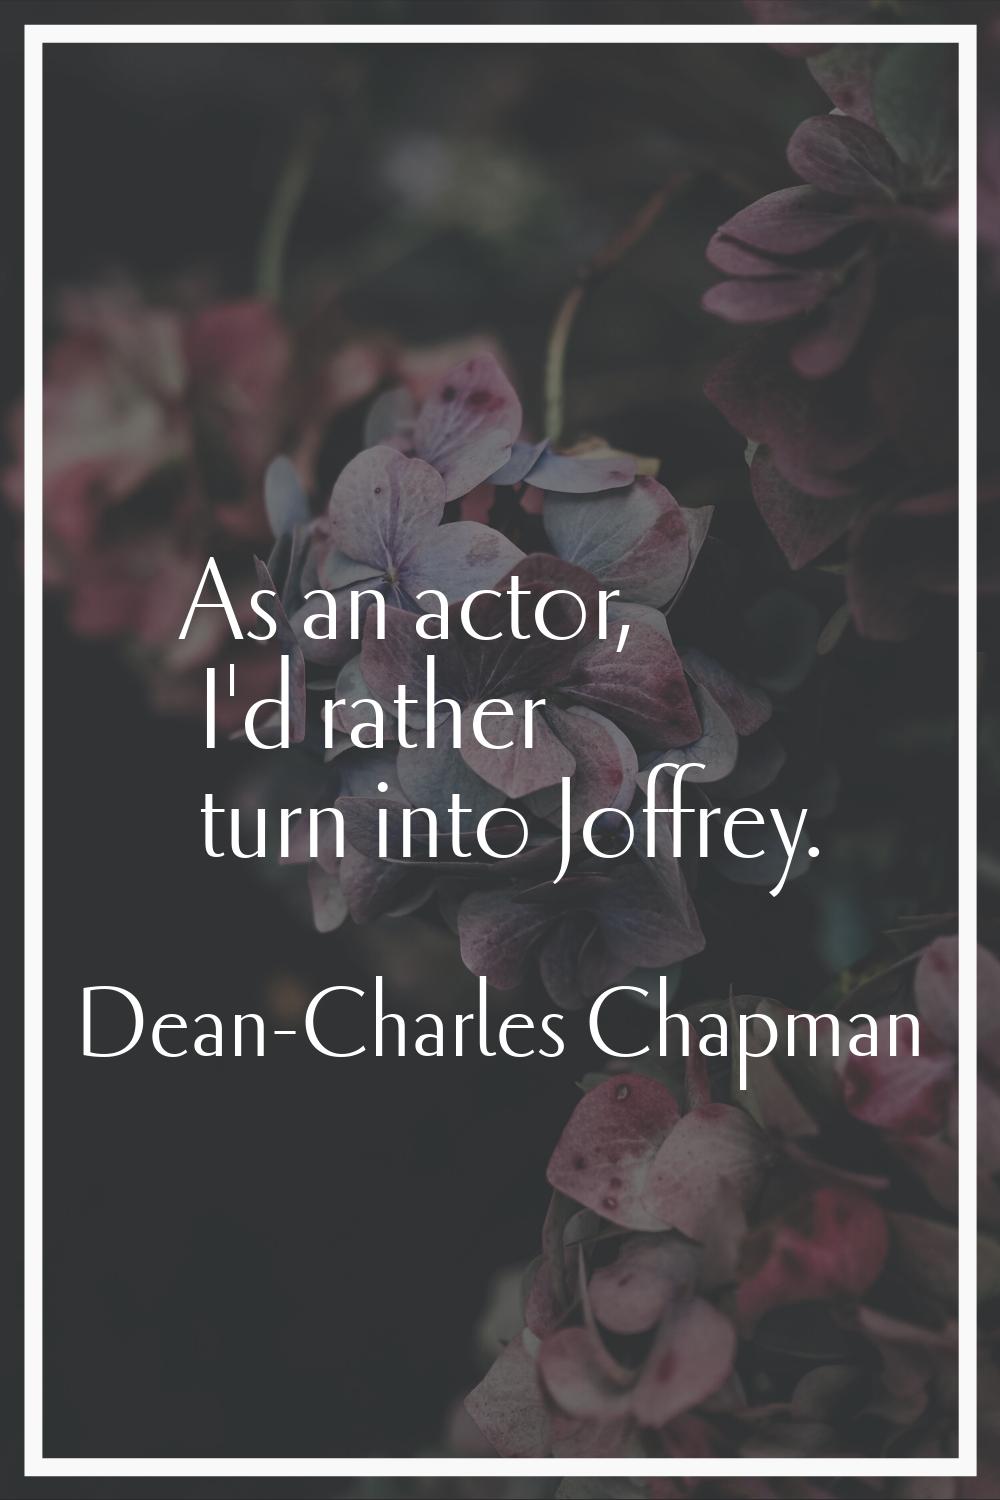 As an actor, I'd rather turn into Joffrey.